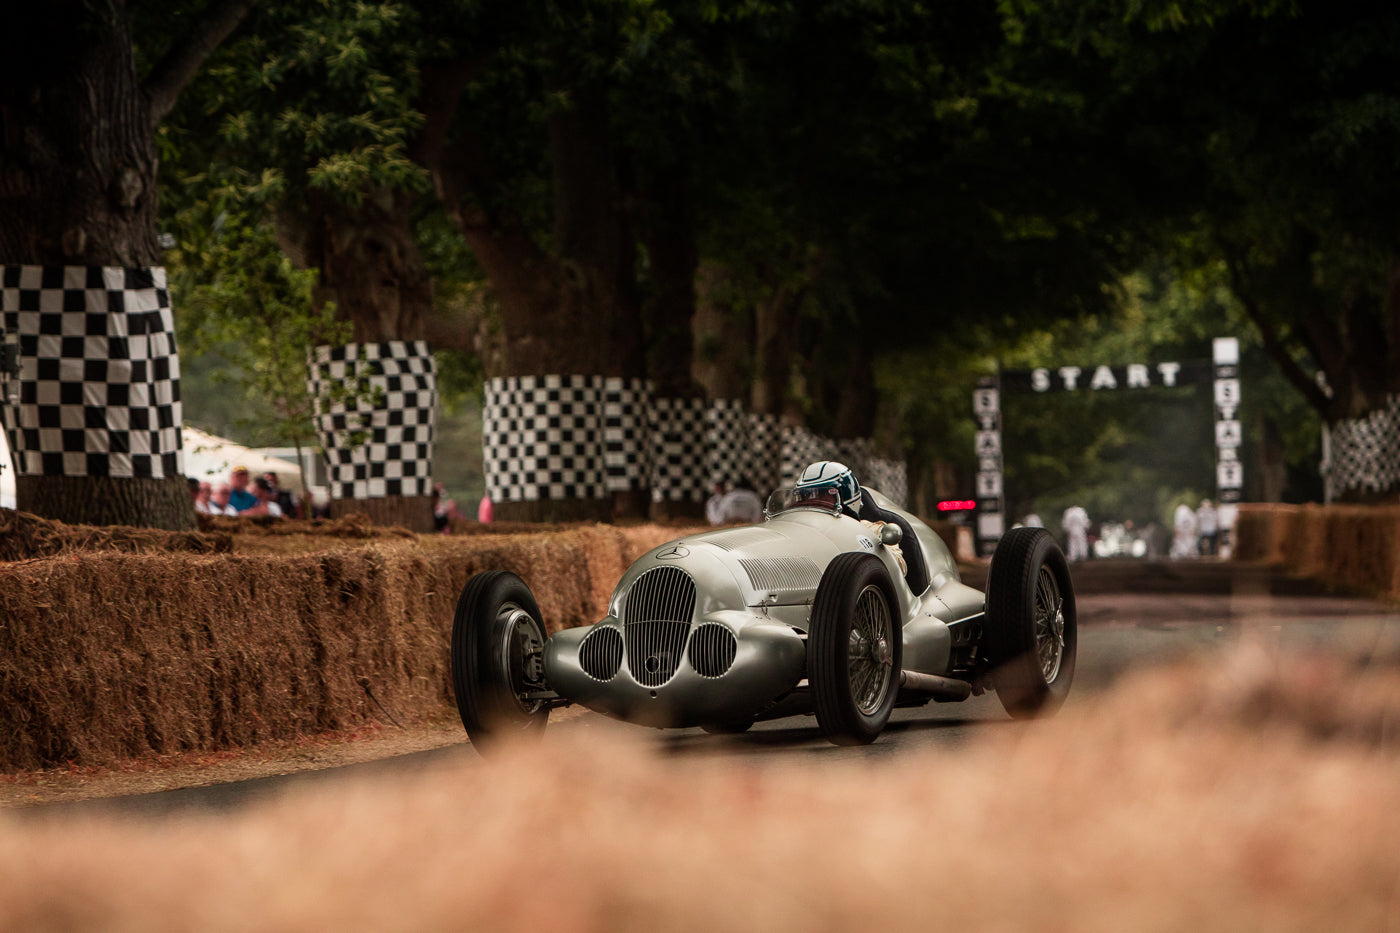 Former Formula 1 driver Jochen Mass is piloting a Mercedes Benz W 125 from 1937 between hay bales on the race track of Goodwood Festival of Speed. (Photo: Alex Lawrence – The White Wall 2018)